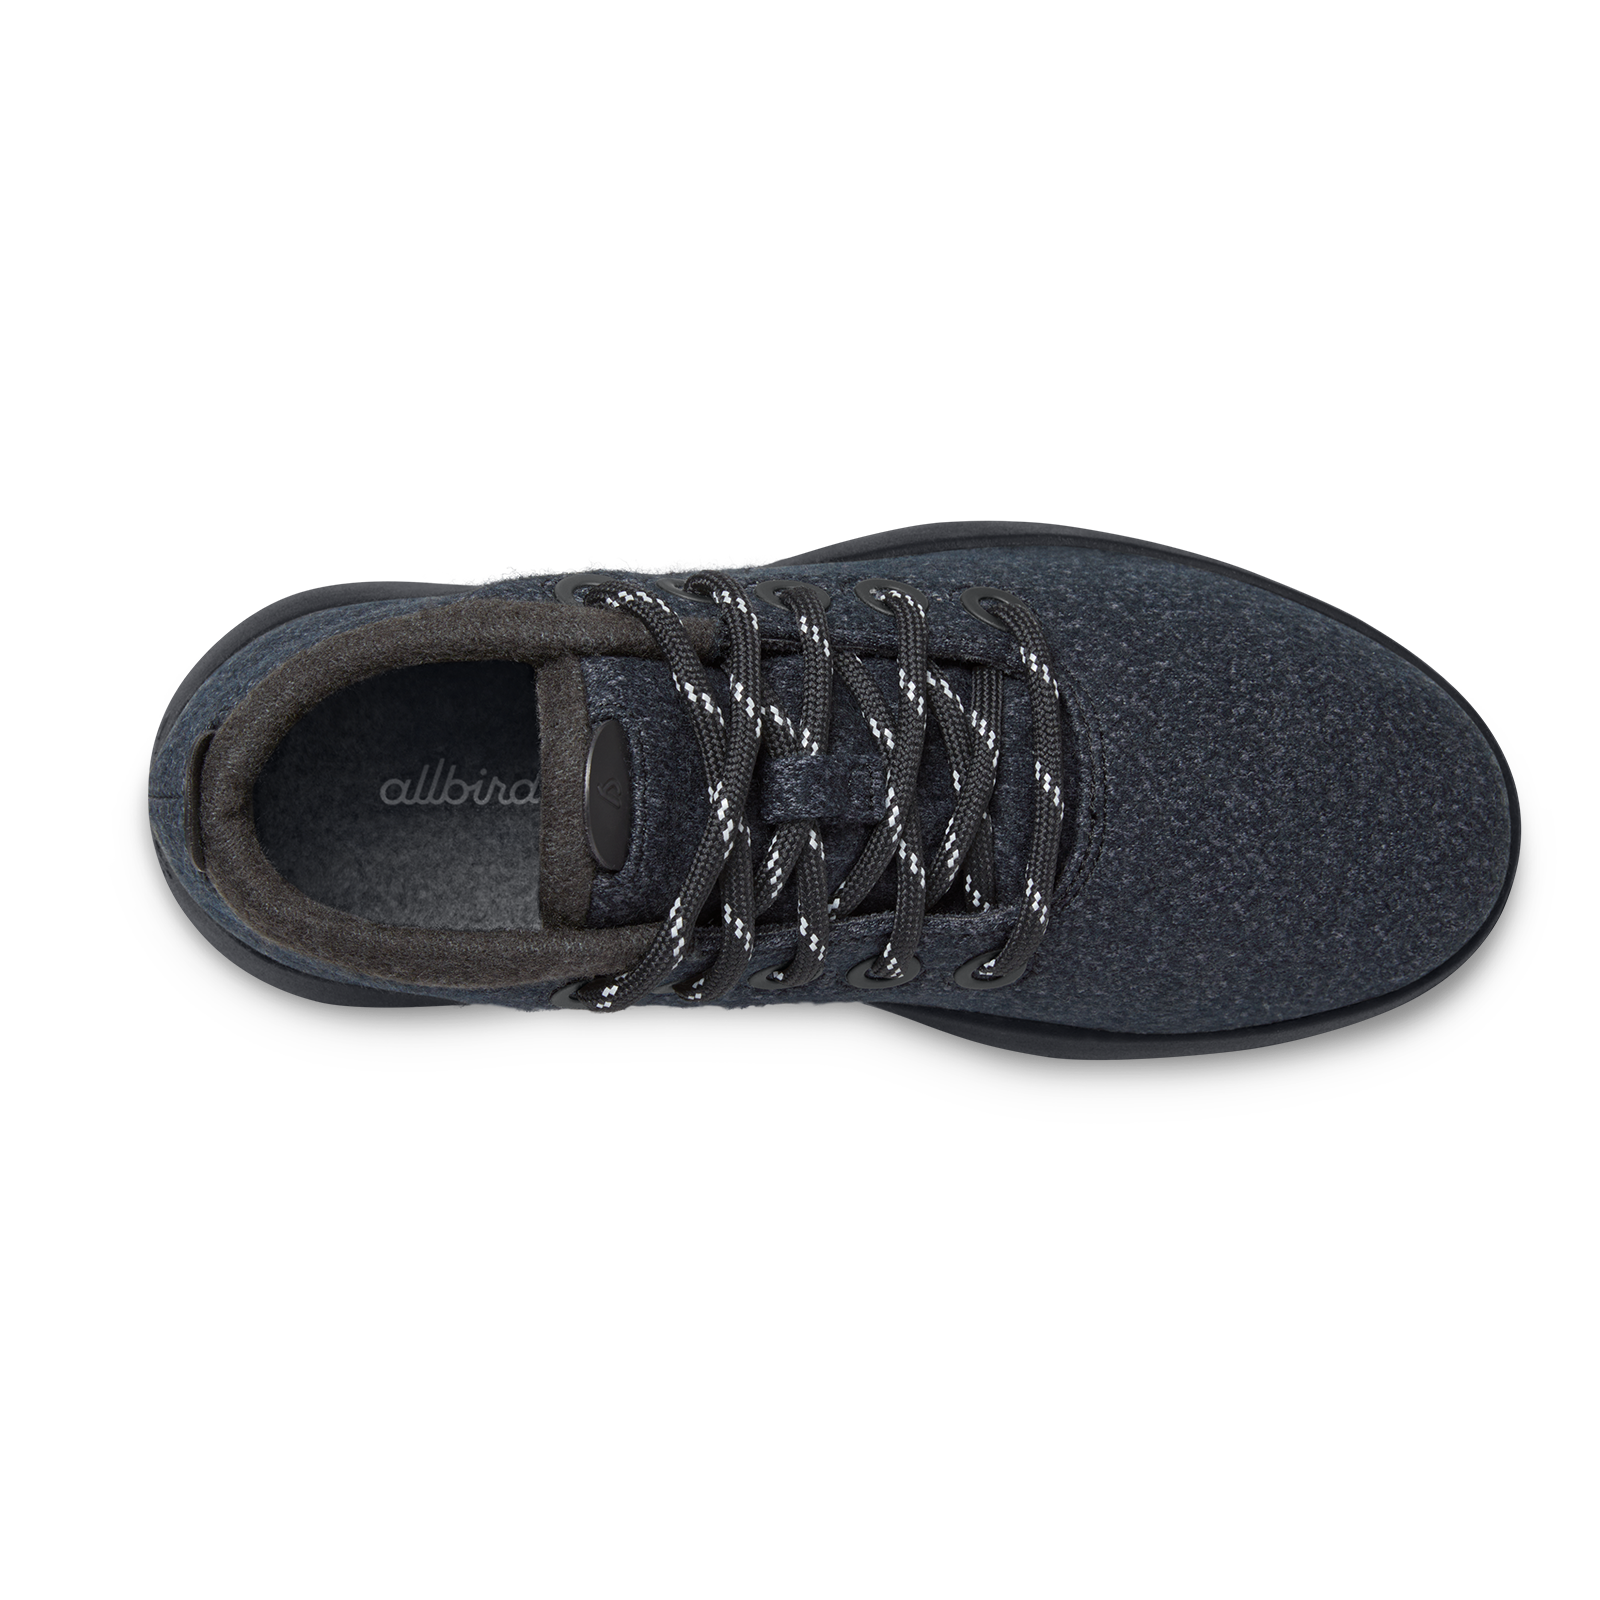 Allbirds, Material and Caraway: Product releases this week